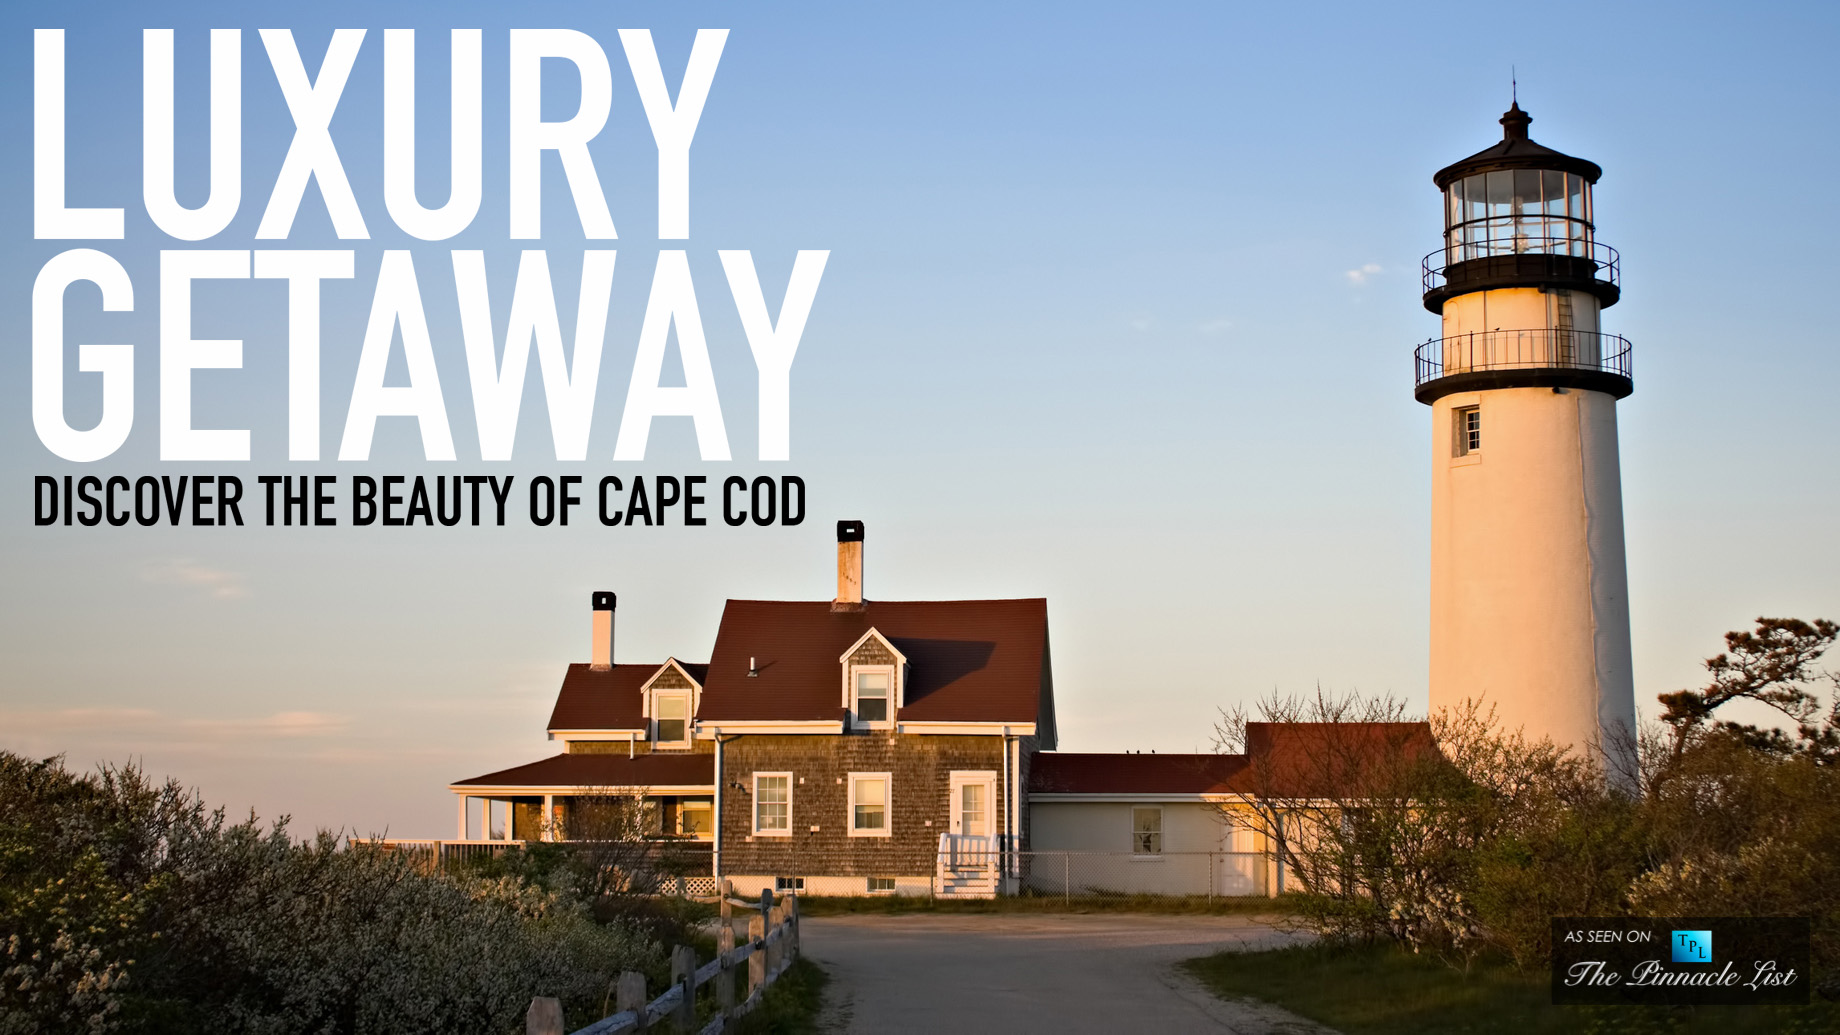 Luxury Getaway – Discover the Beauty of Cape Cod